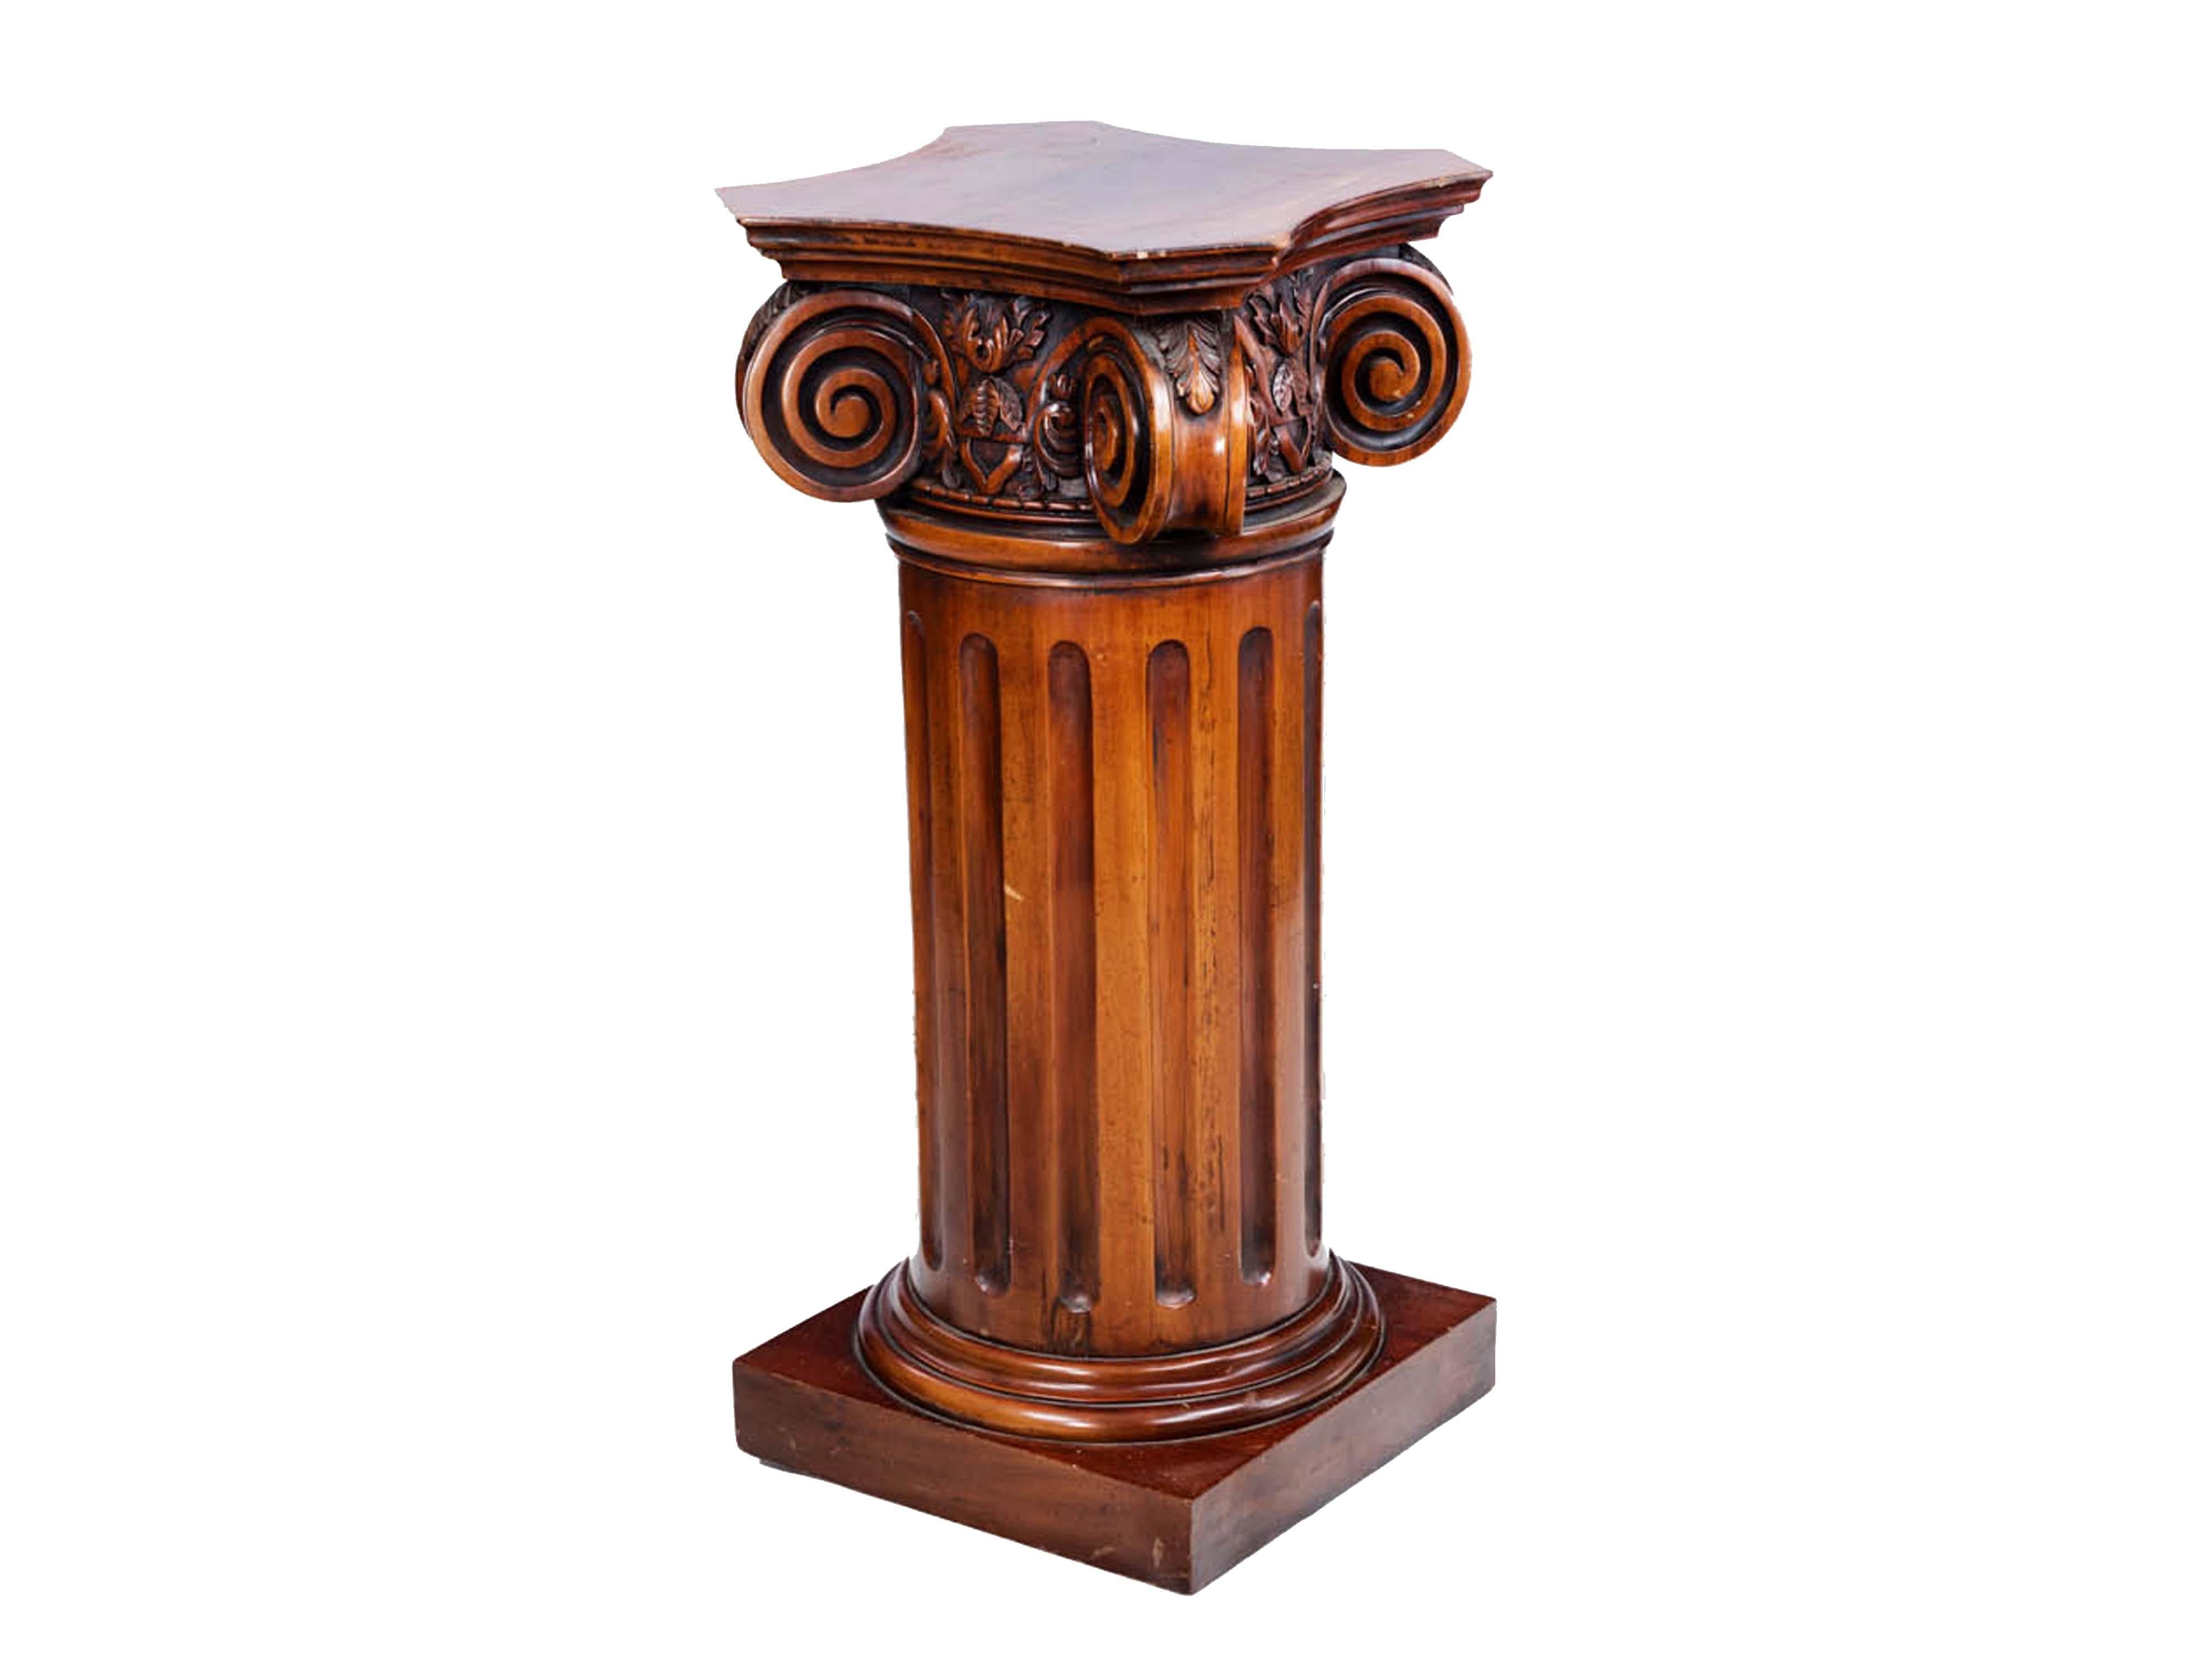 Early 20th century mahogany plinth in the form of a classical-style fluted column with carved Ionic scrolling and Corinthian foliate detail to the capital.